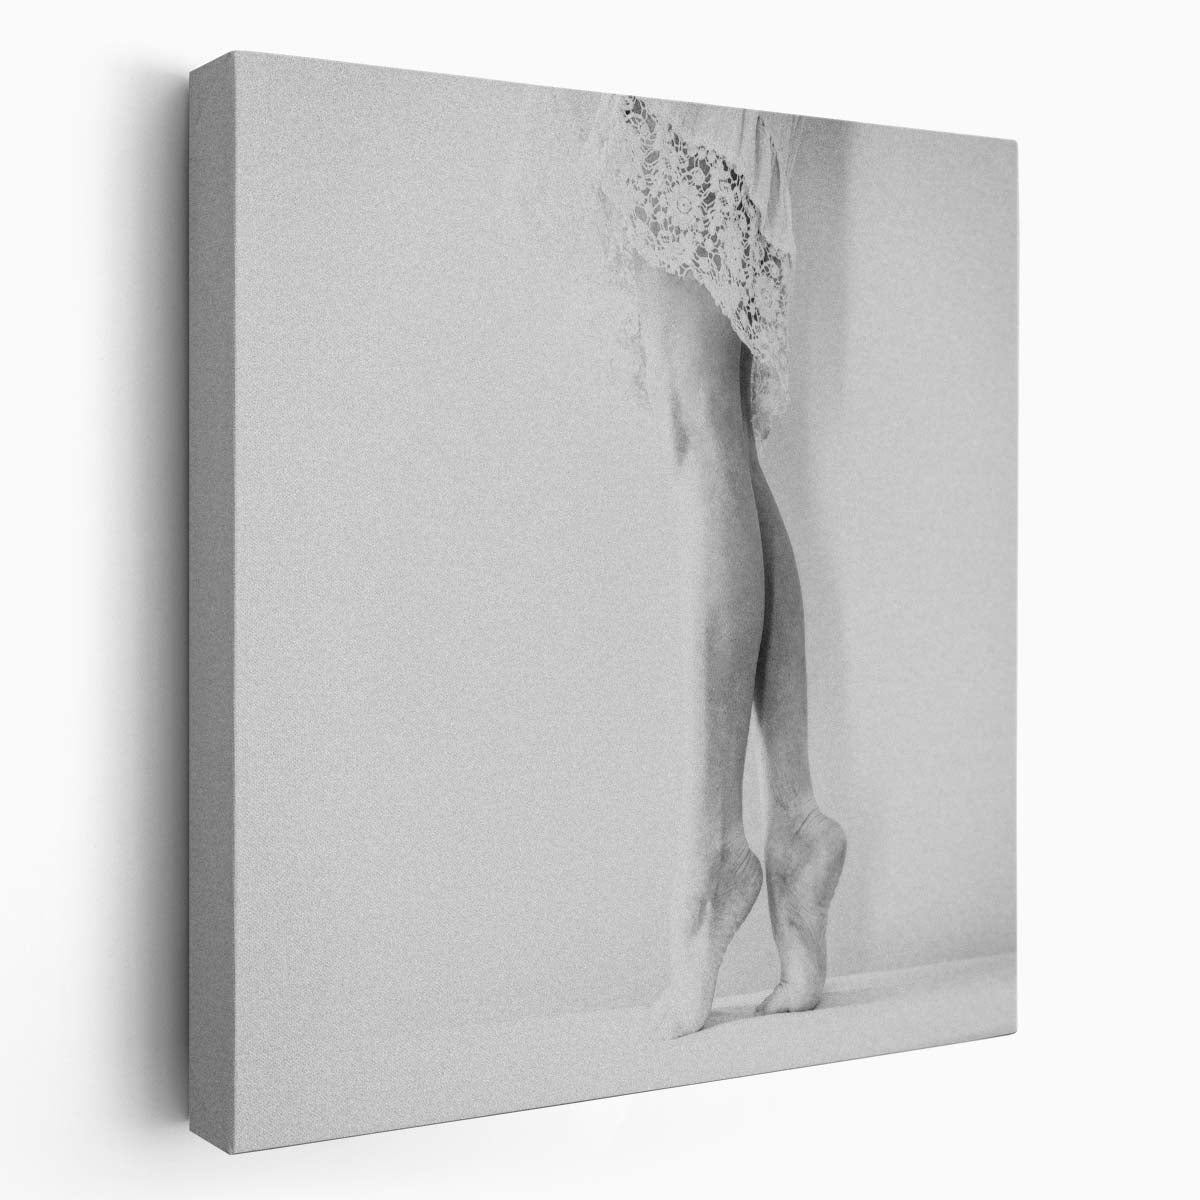 Delicate Monochrome Portrait of a Ballerina in Lace, Netherlands Wall Art by Luxuriance Designs. Made in USA.